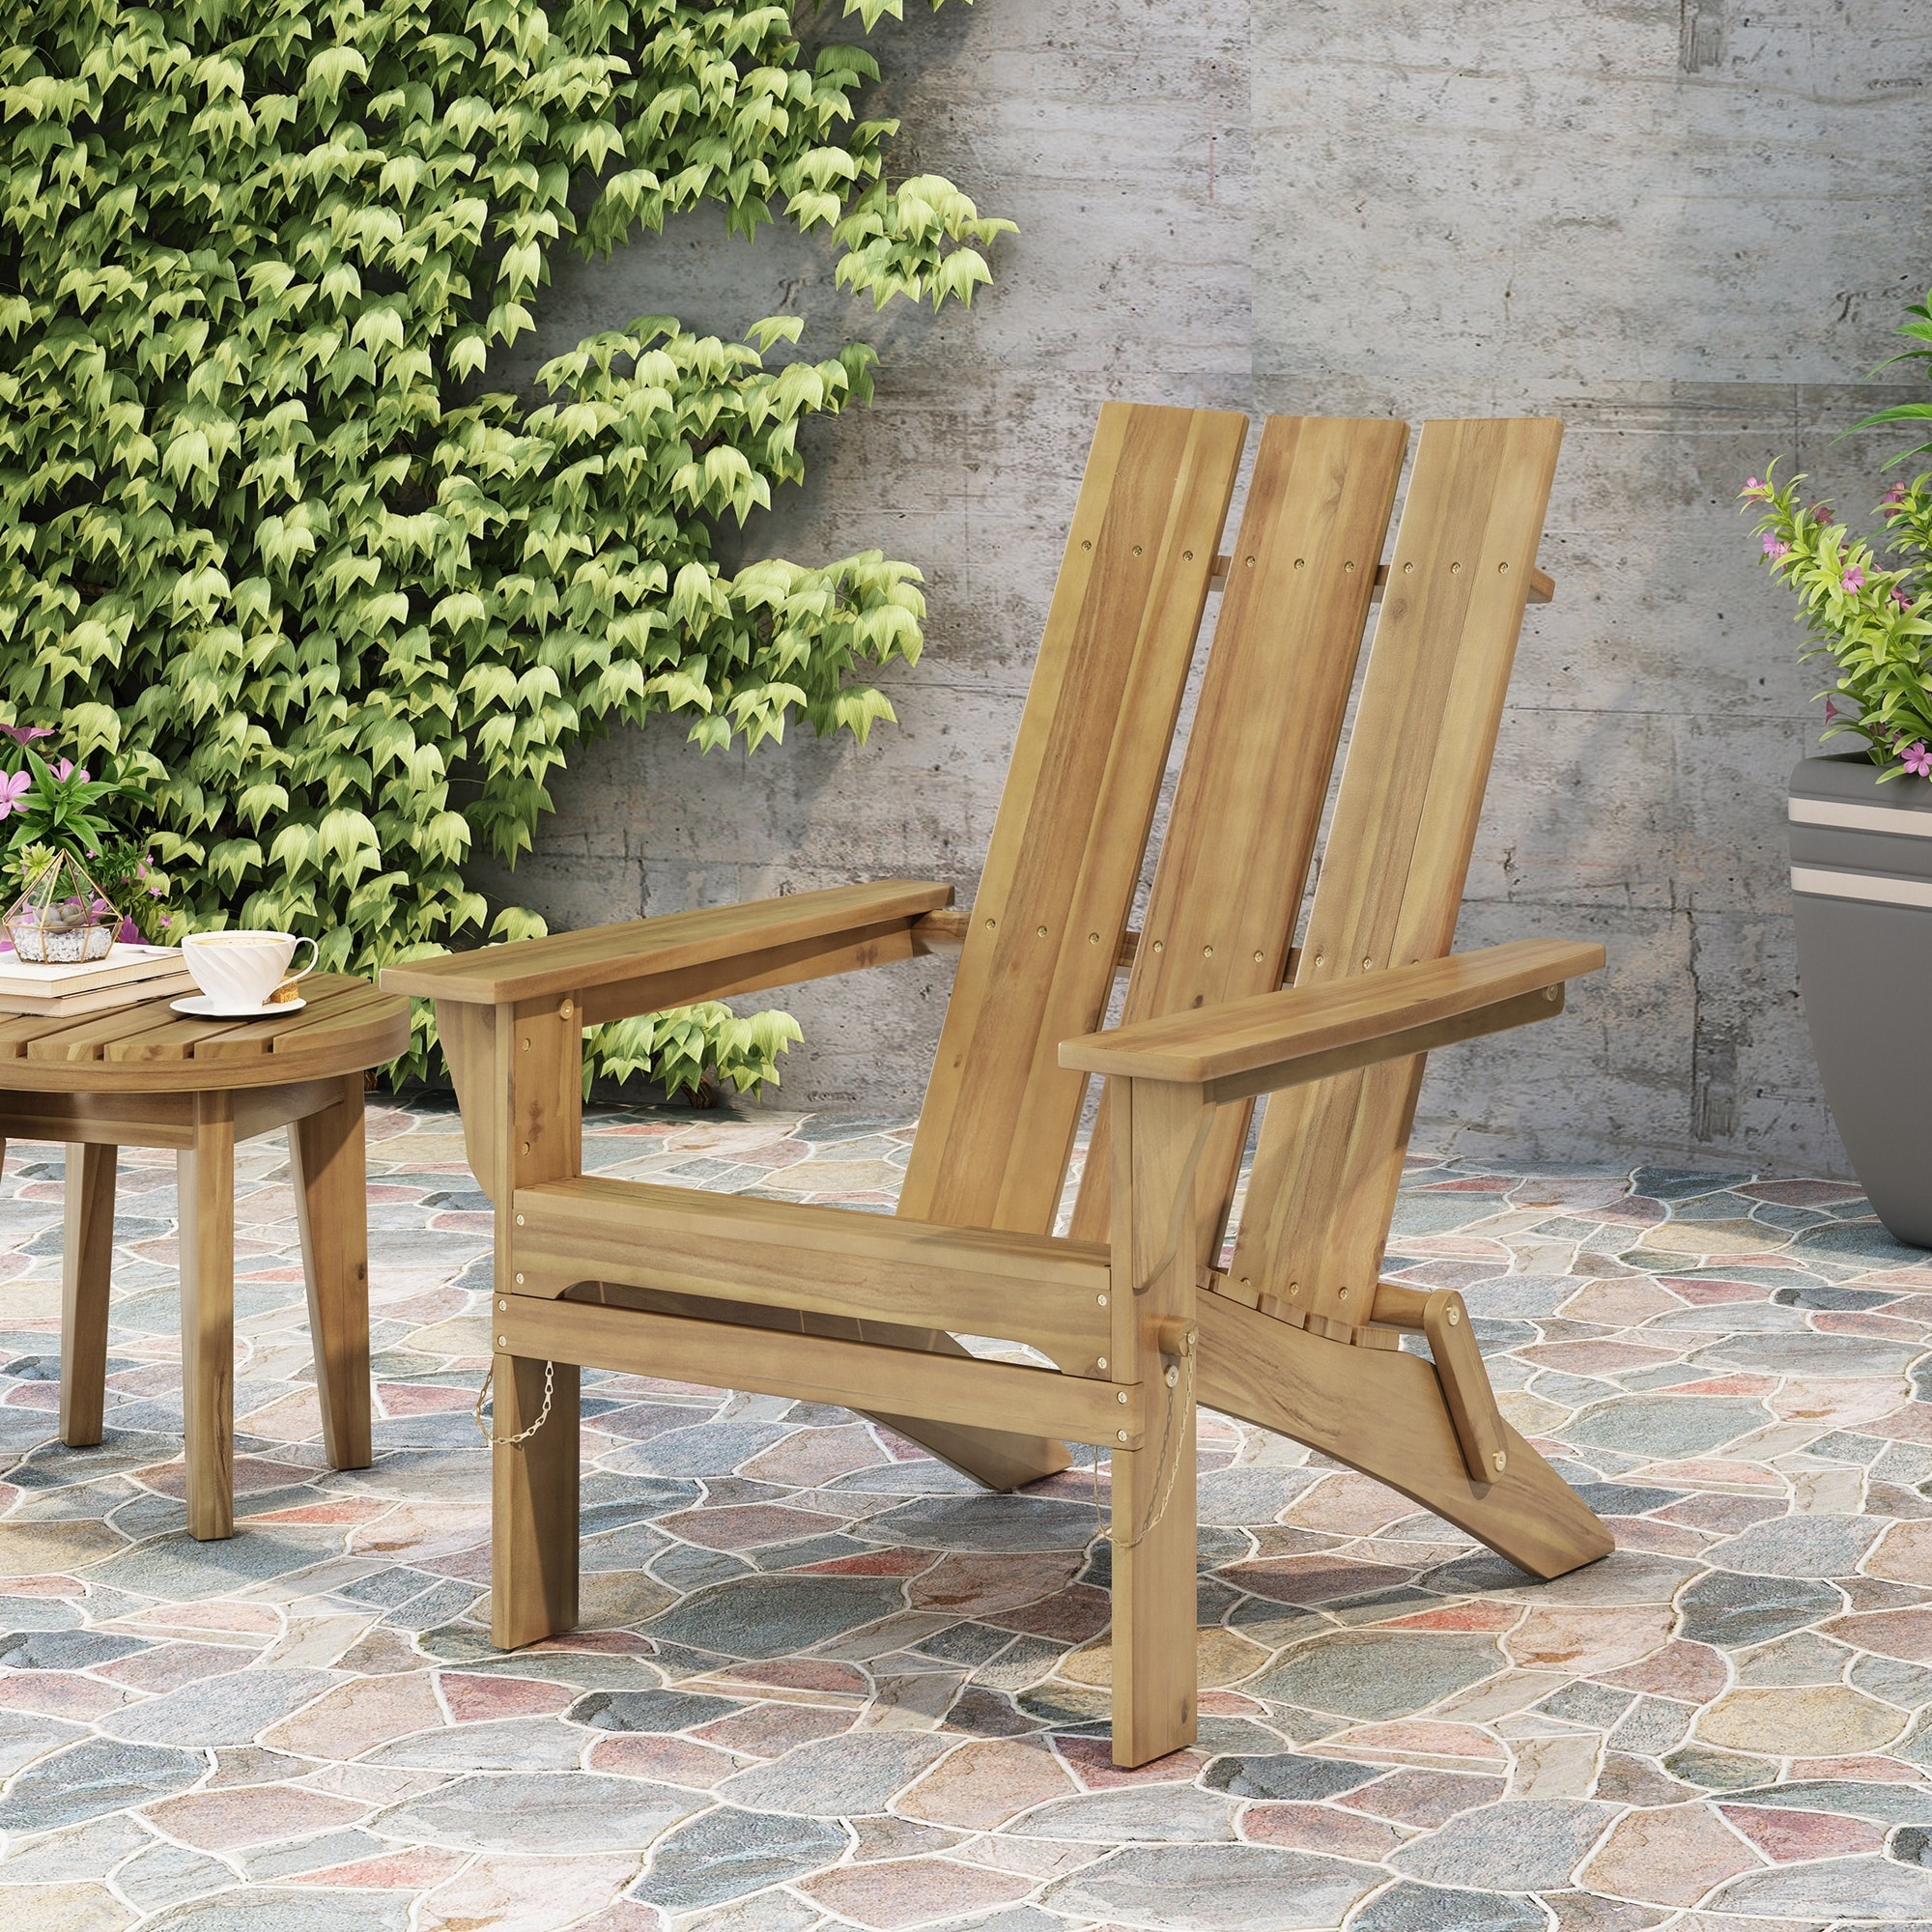 Outdoor Patio Classic Solid Wood Adirondack Chair Garden Lounge Chair